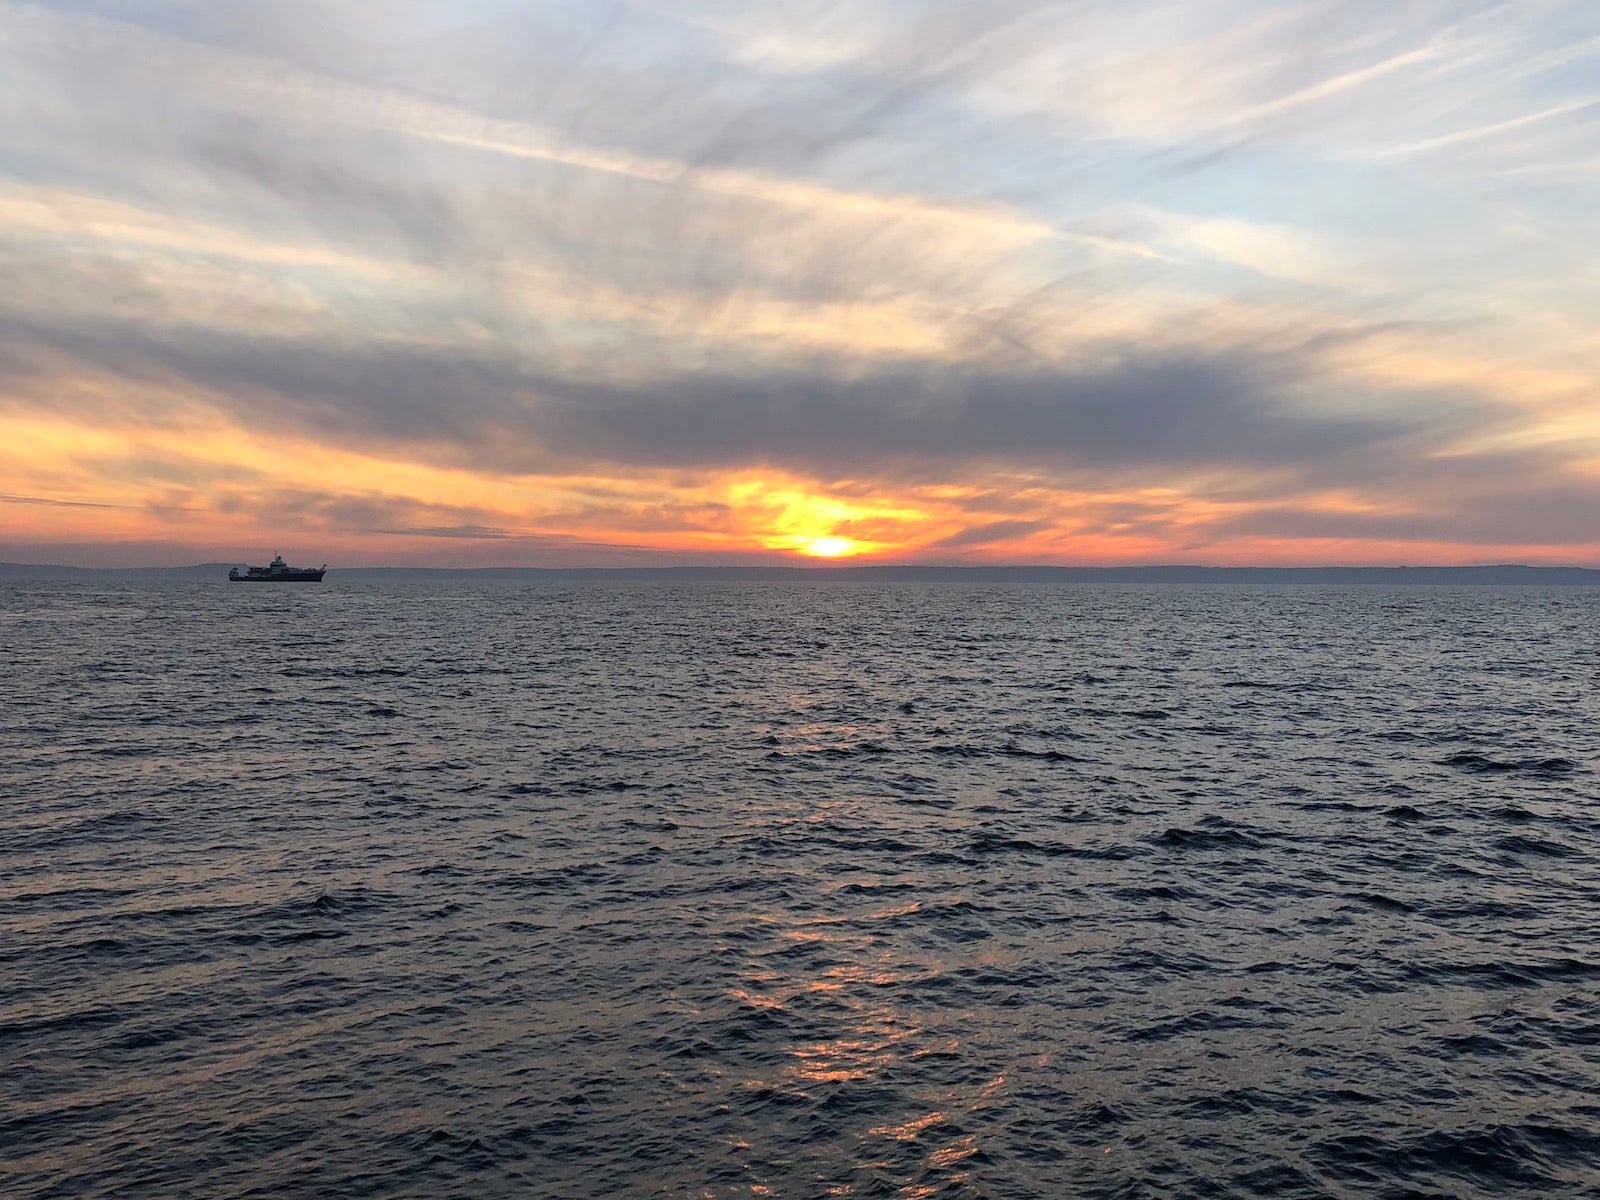 SUnset at sea, with another research vessel far in the distance.